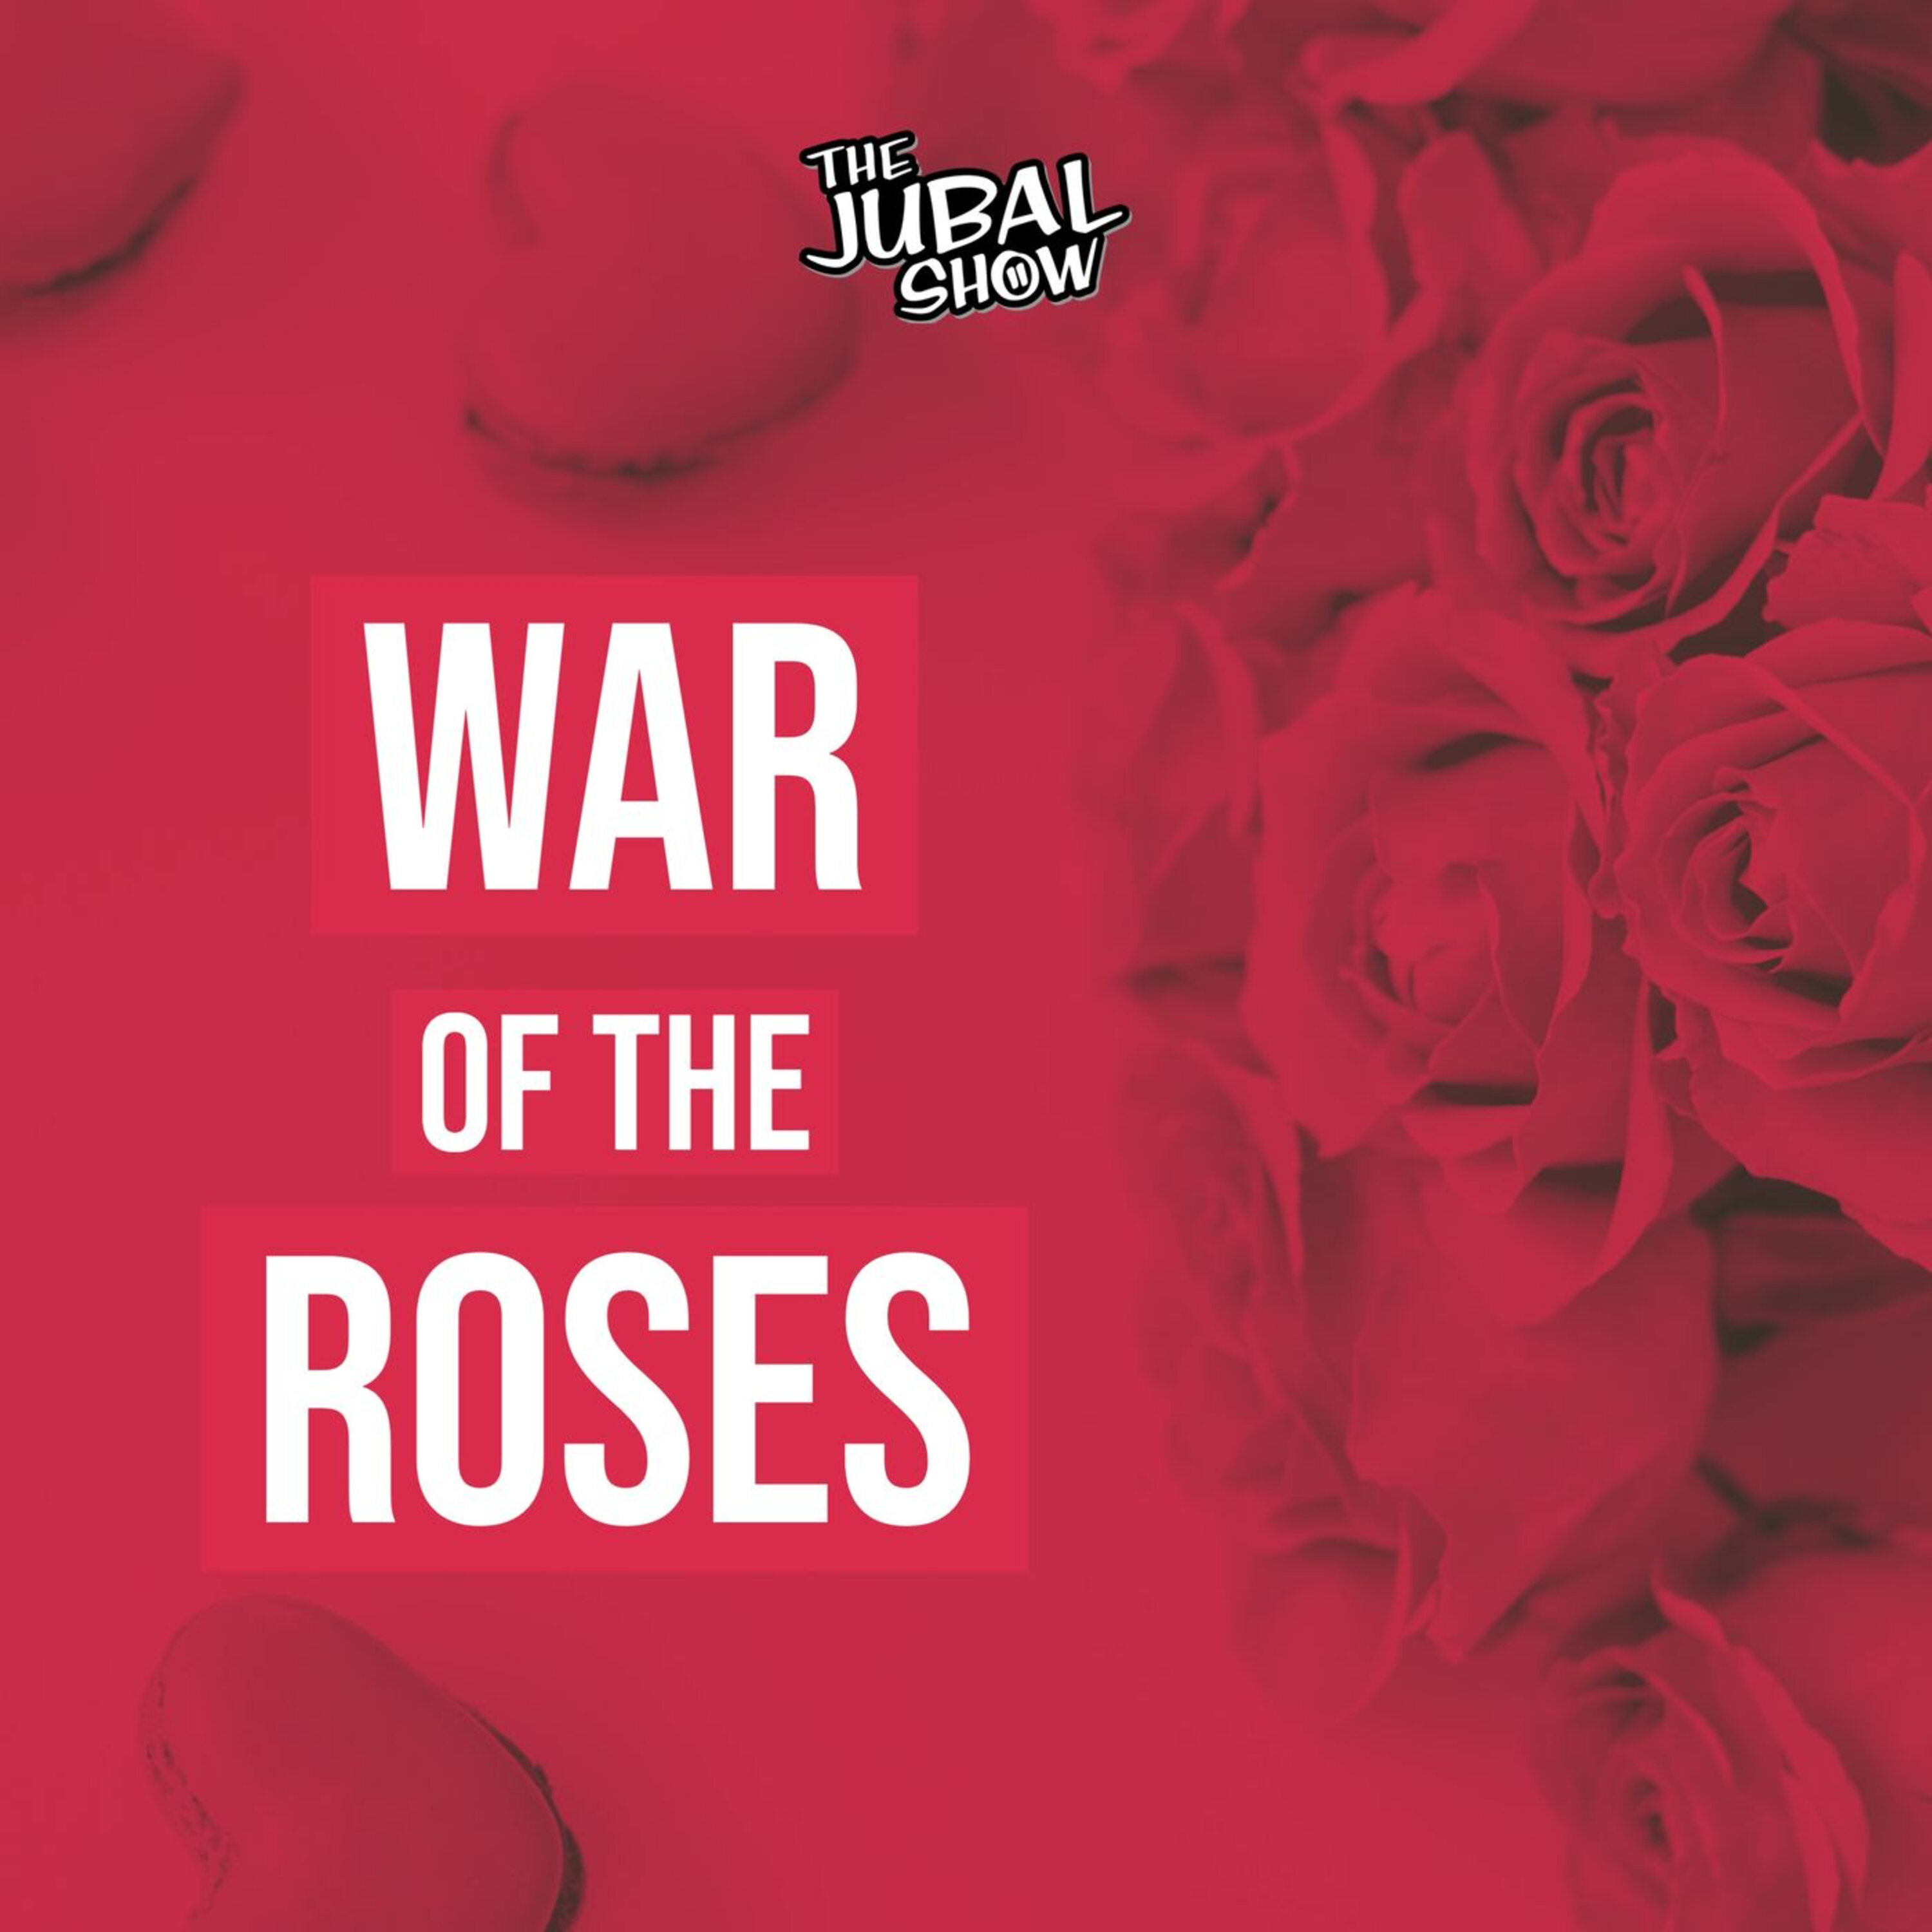 The Jubal Show finds a list in this War of the Roses!